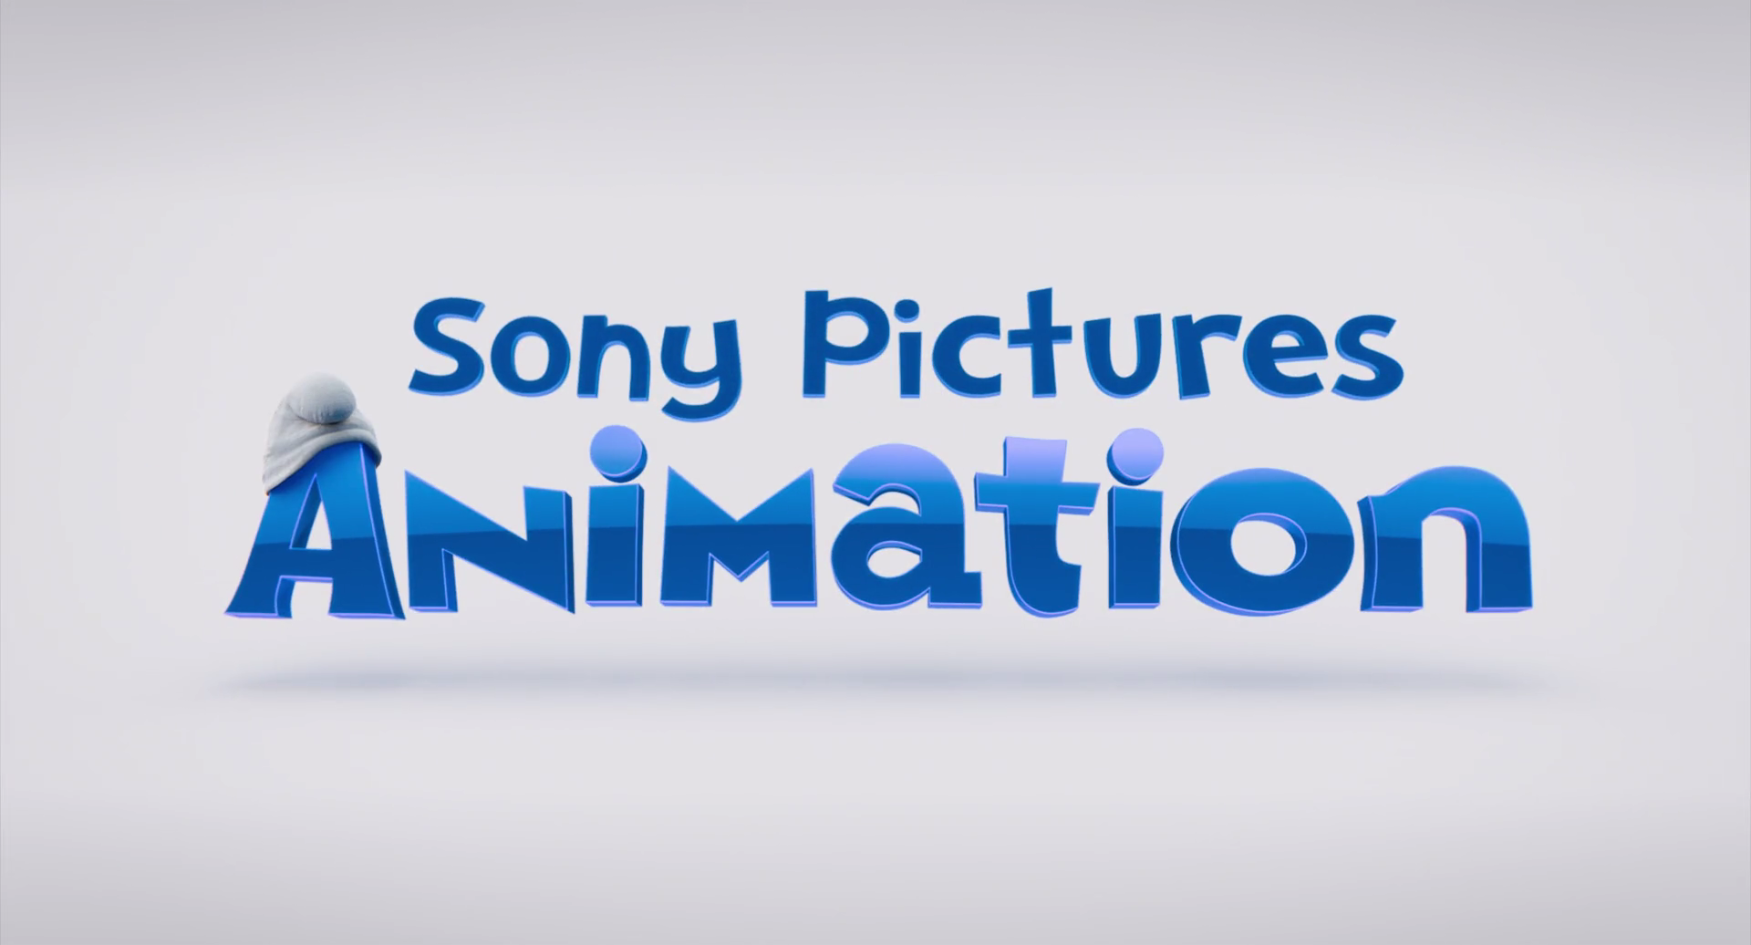 Sony Pictures Animation Logo 2012 - Just About Animal